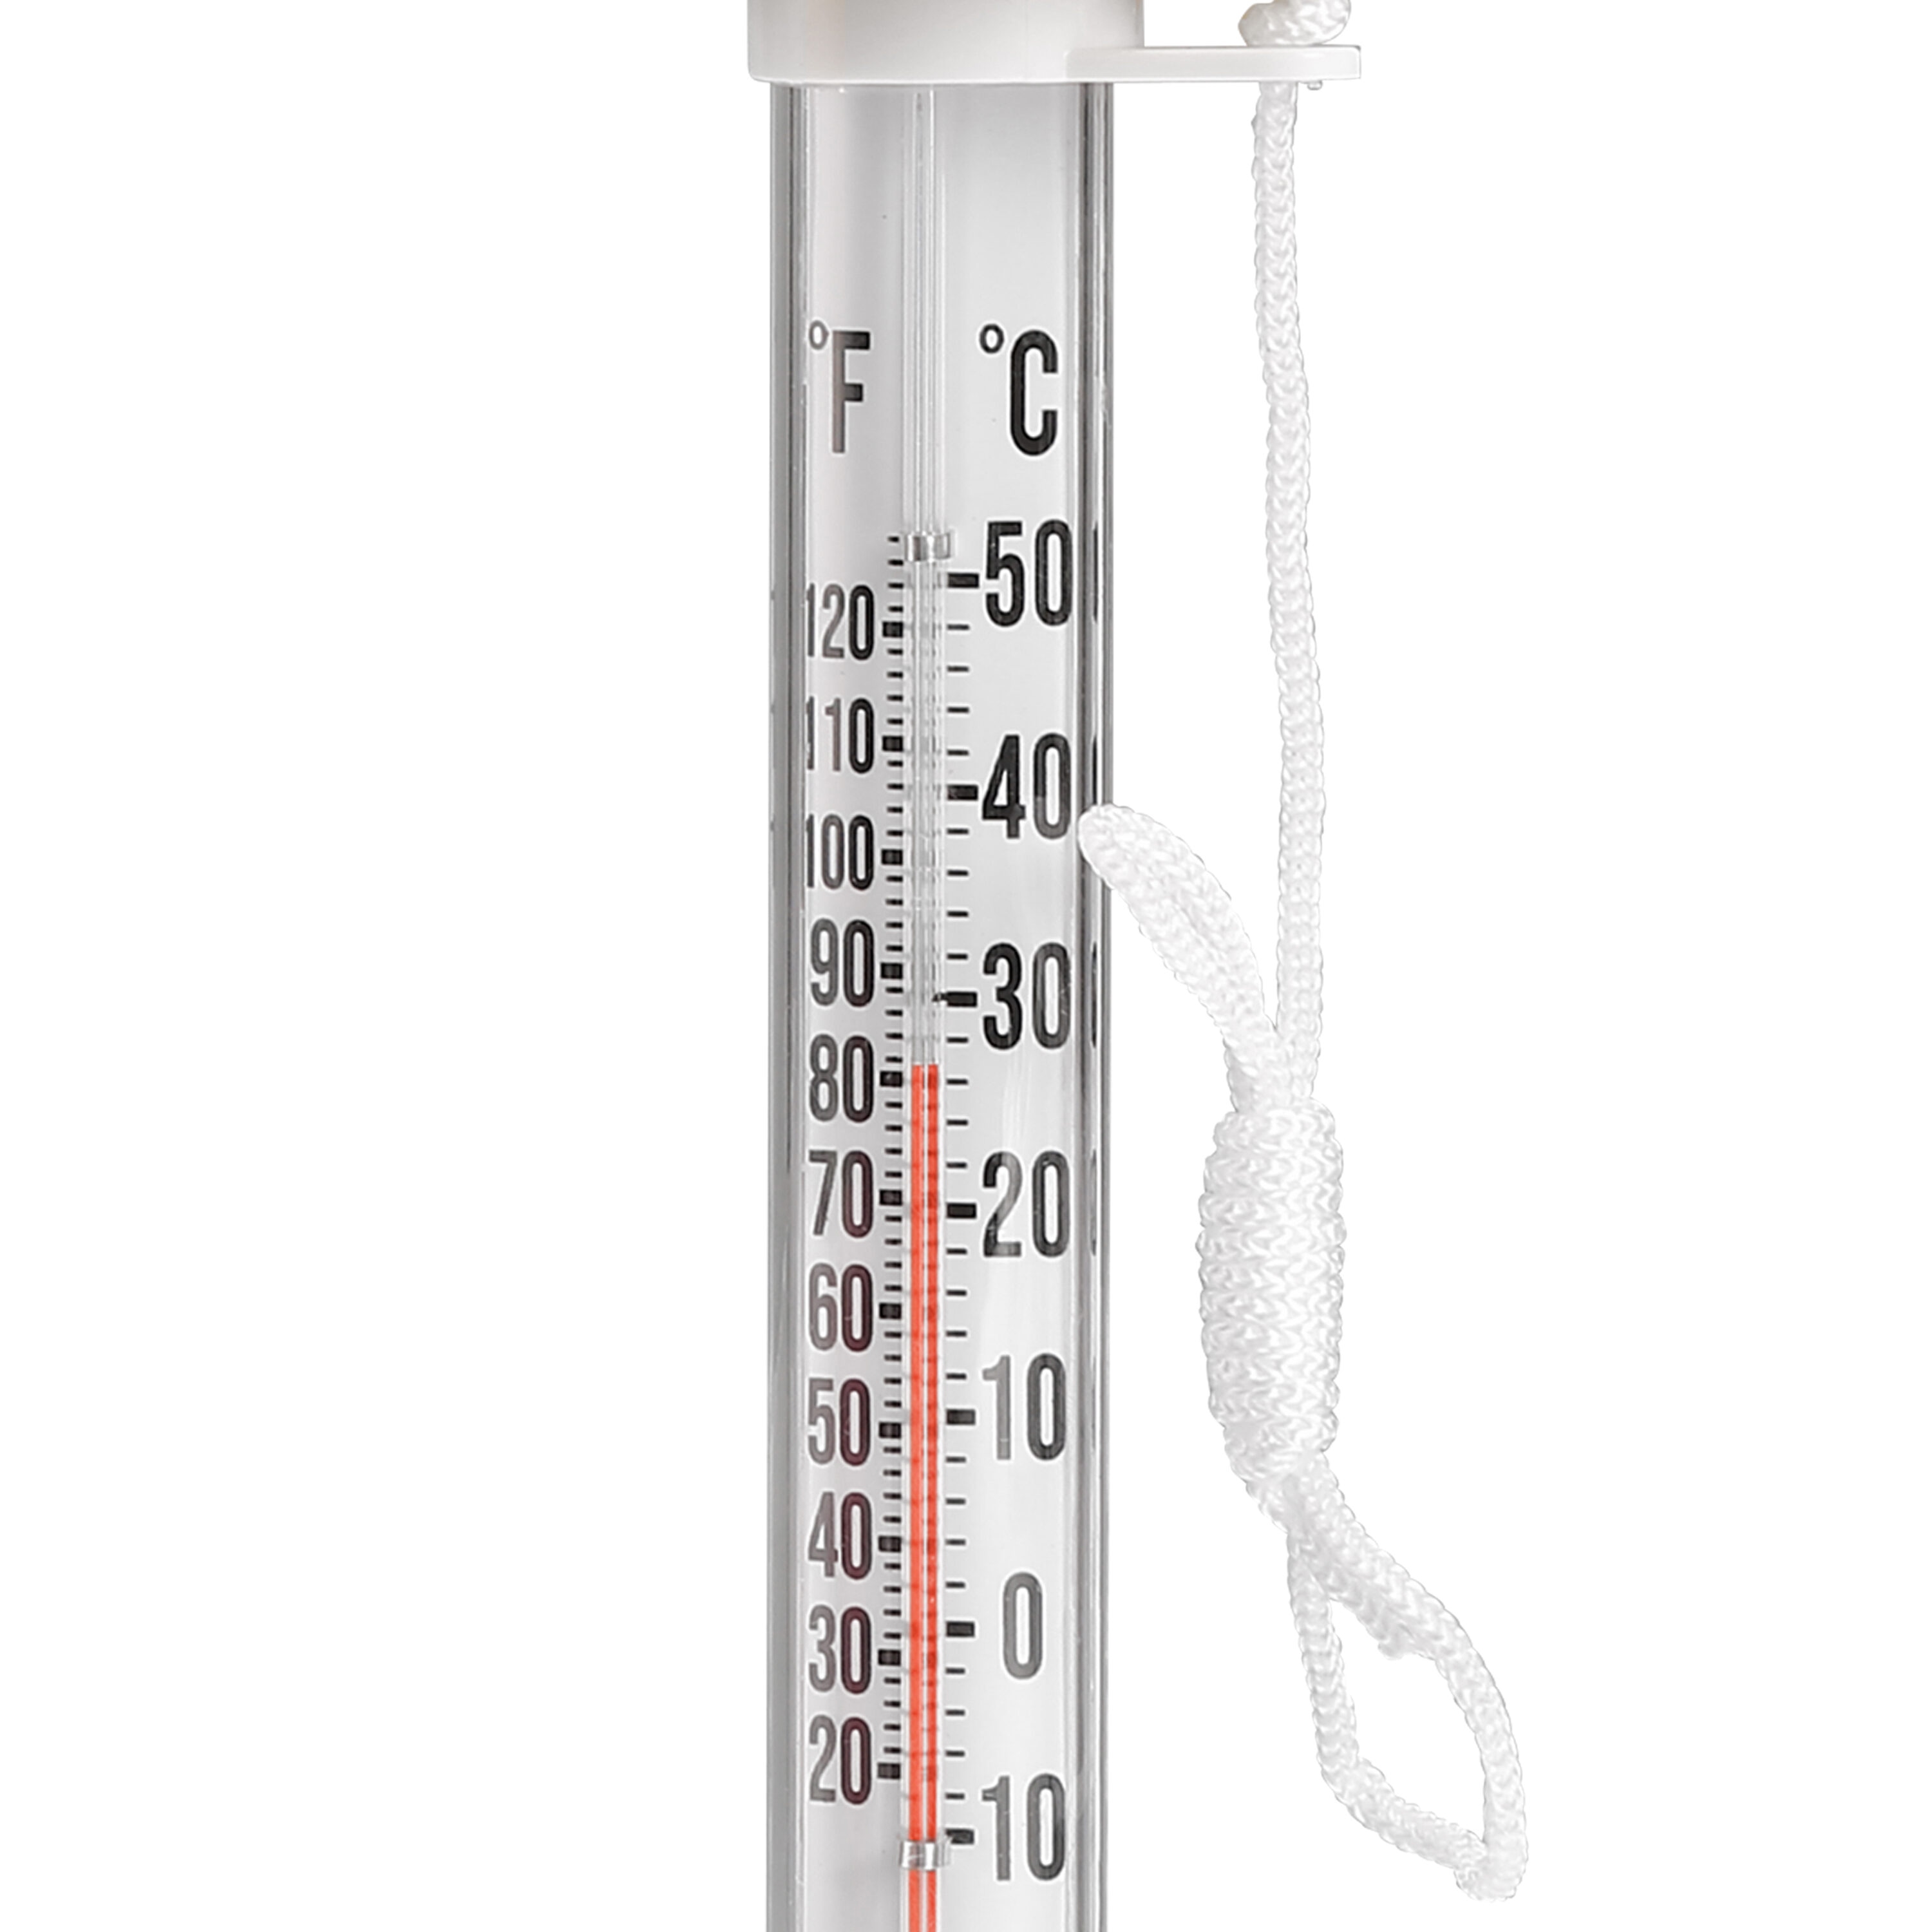 HydroTools Pool and Spa Water Temperature Gauge Digital Thermometer  (2-Pack) 2 x 9250 - The Home Depot